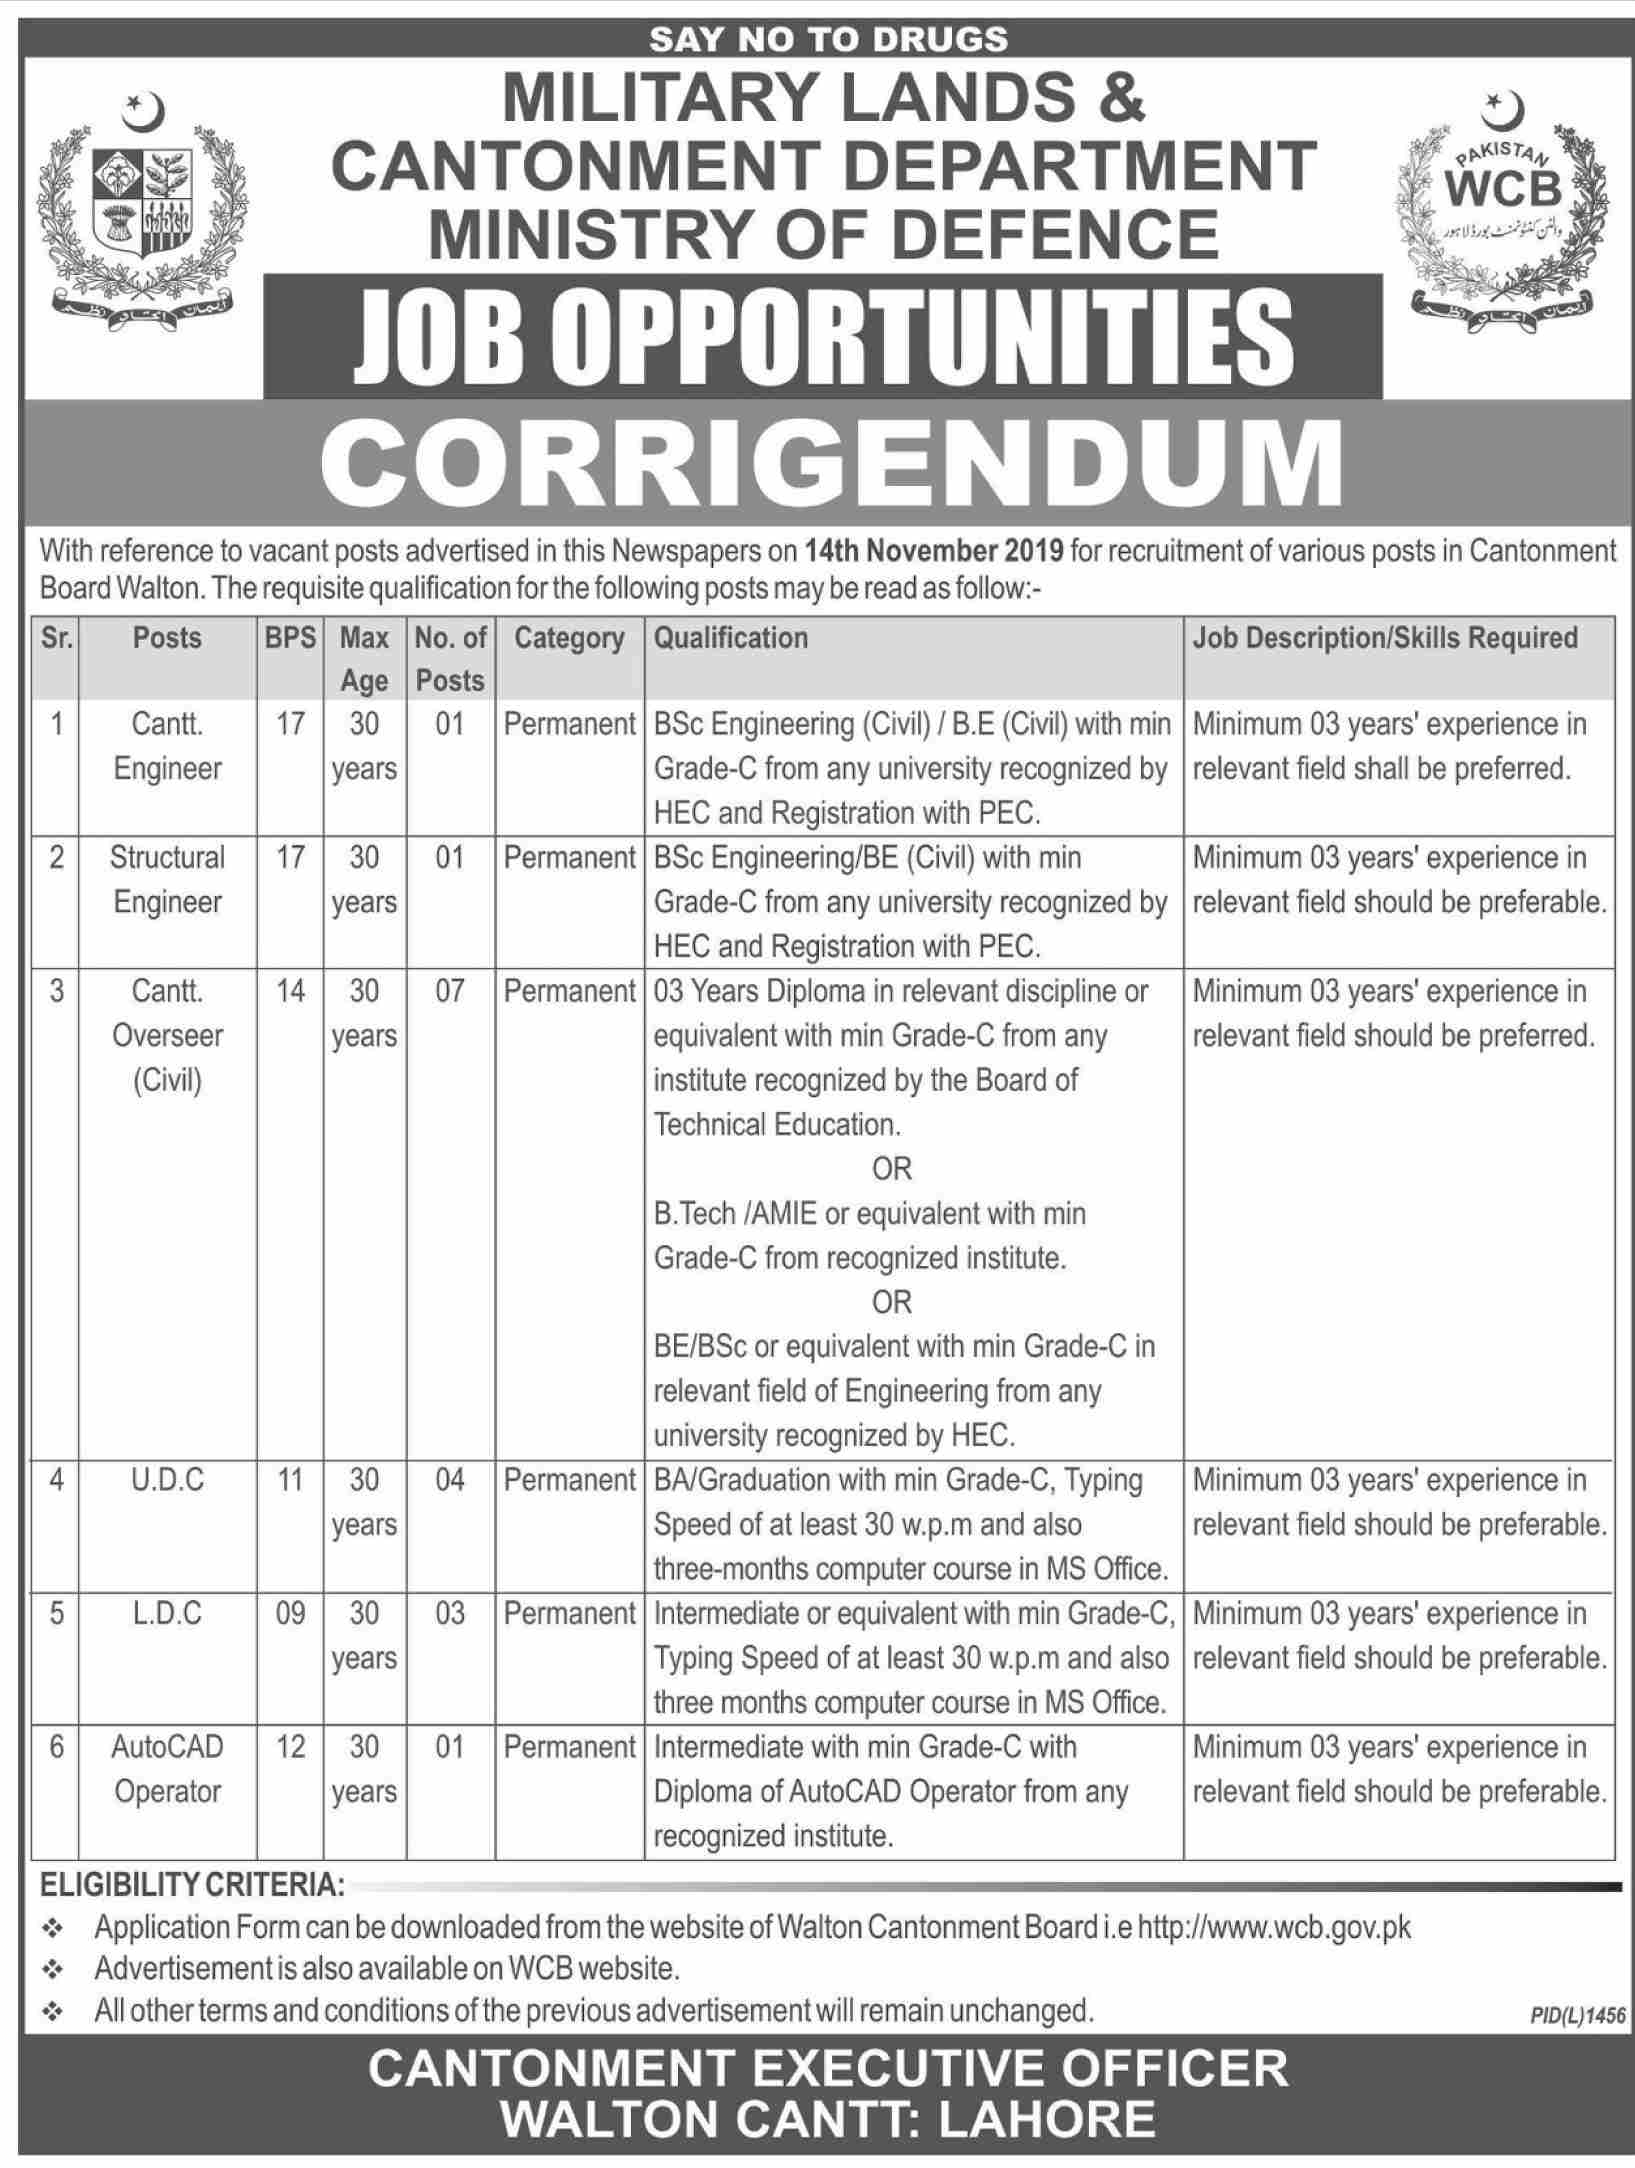 Cantt Engineer,Ldc, Autocad Operator  Jobs In Military Lands & Cantonment Department Islamabad